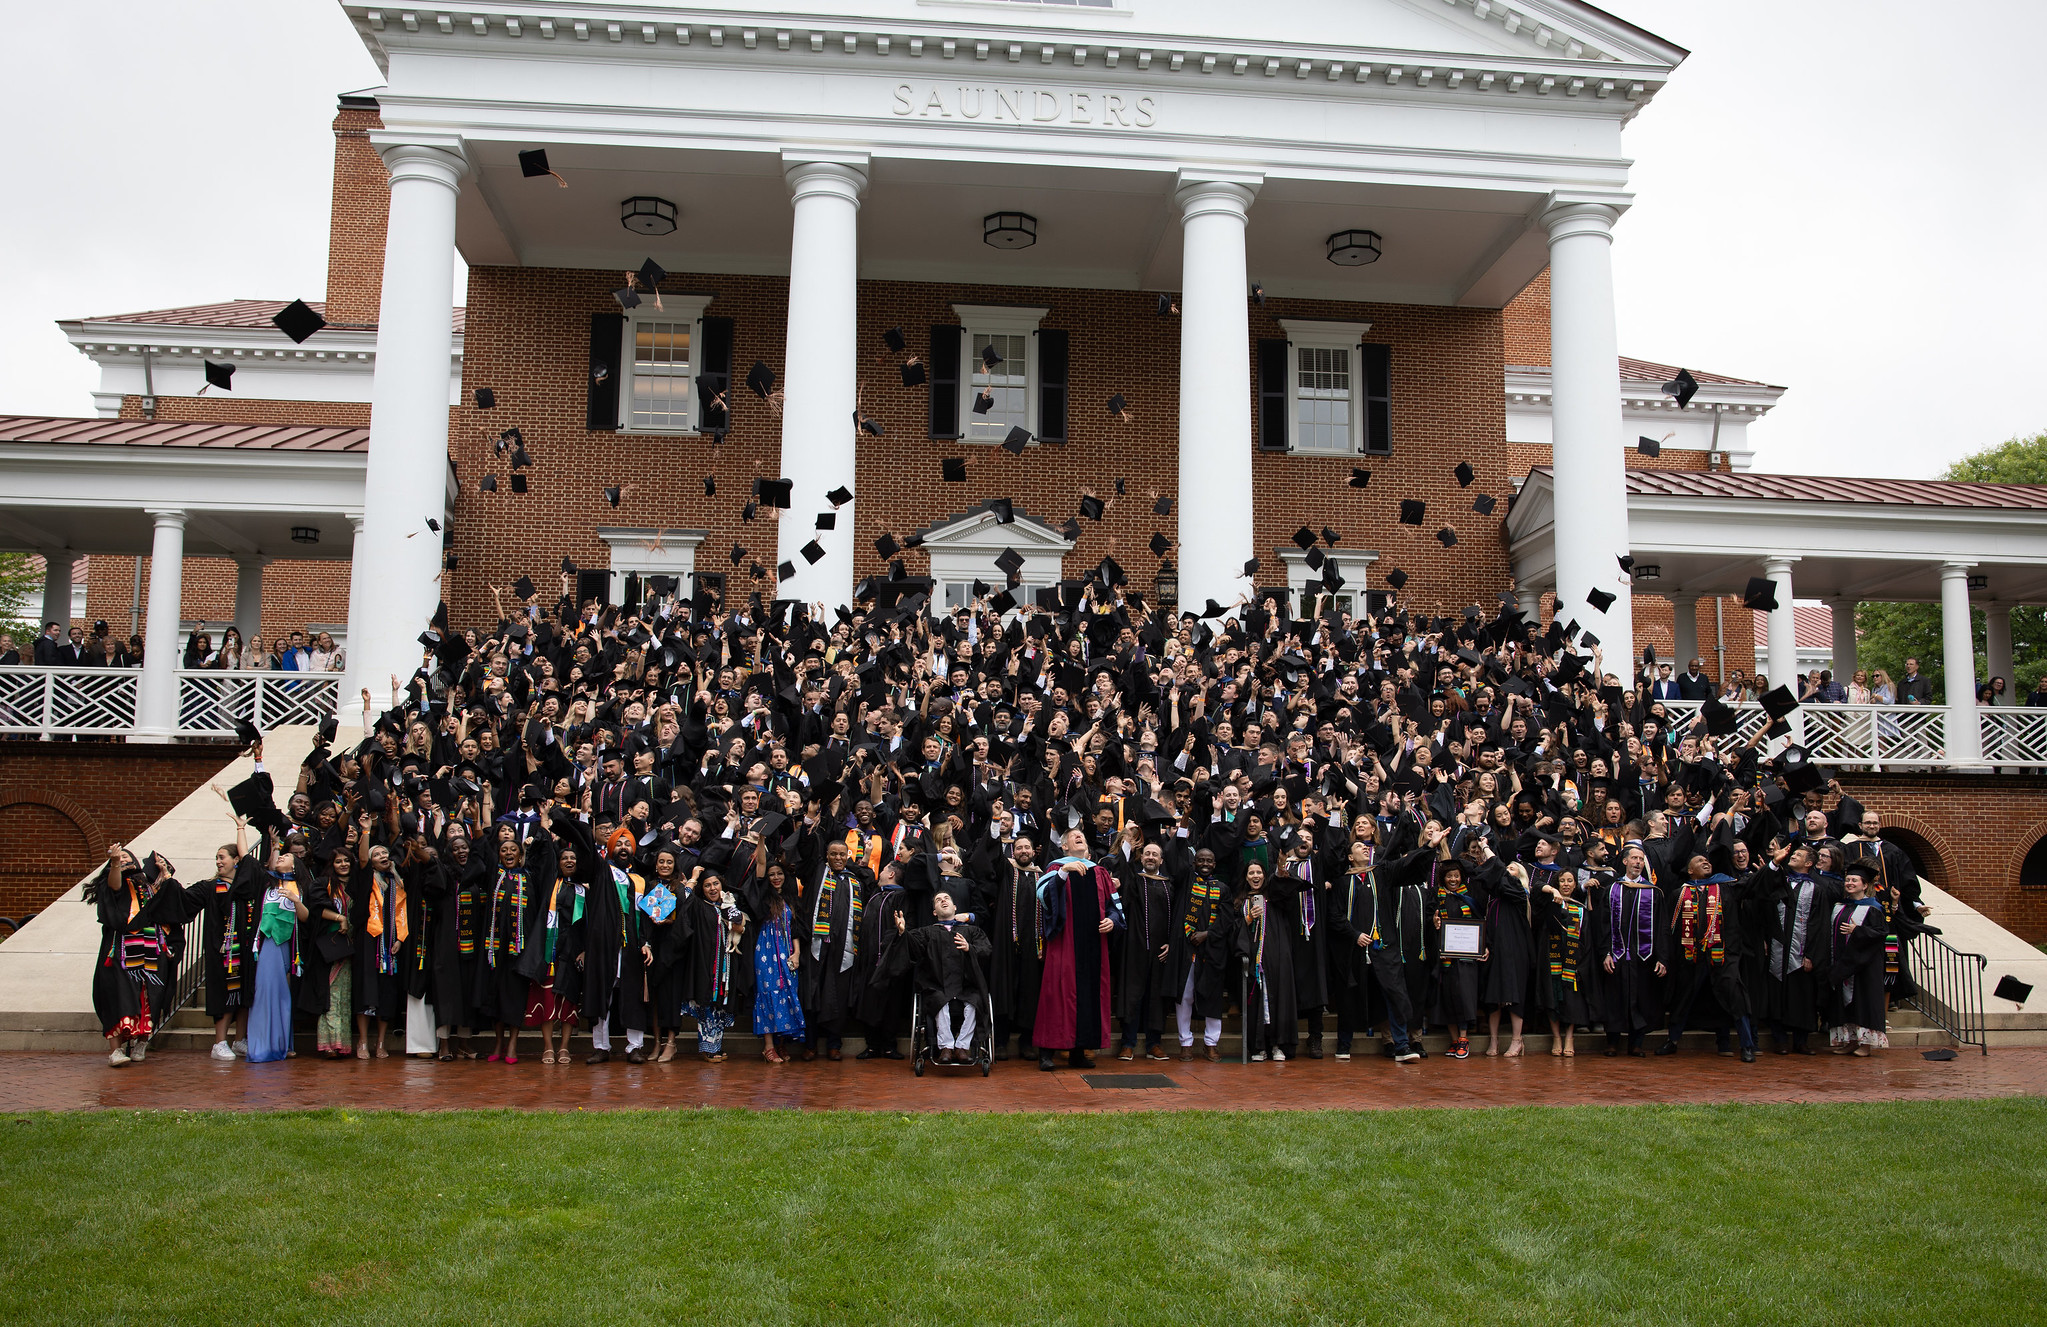 A group shot of the Darden graduates throwing their hats on the steps of Saunders Hall.